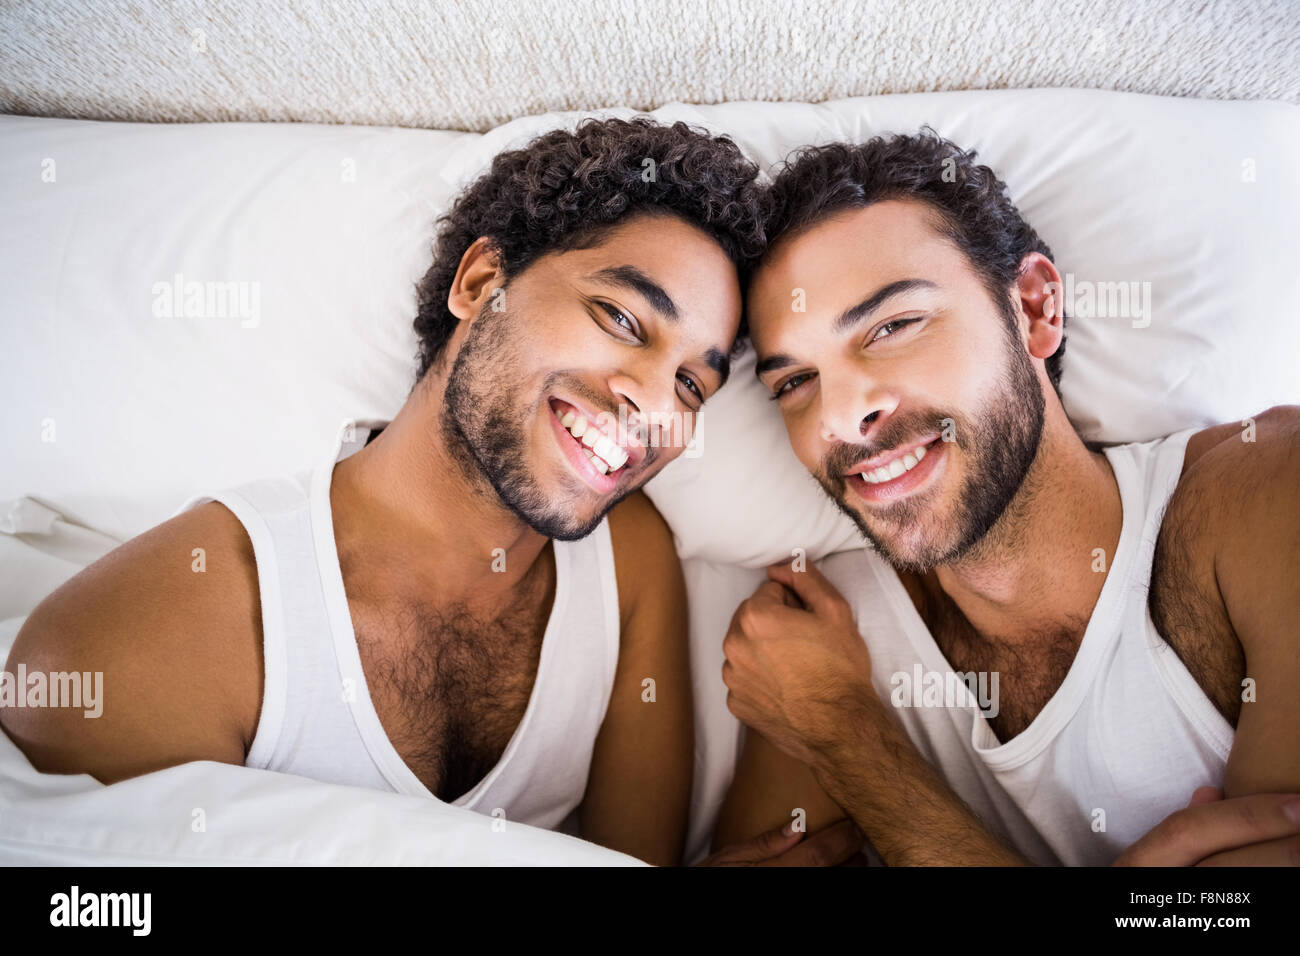 Gay couple Smiling on bed Banque D'Images